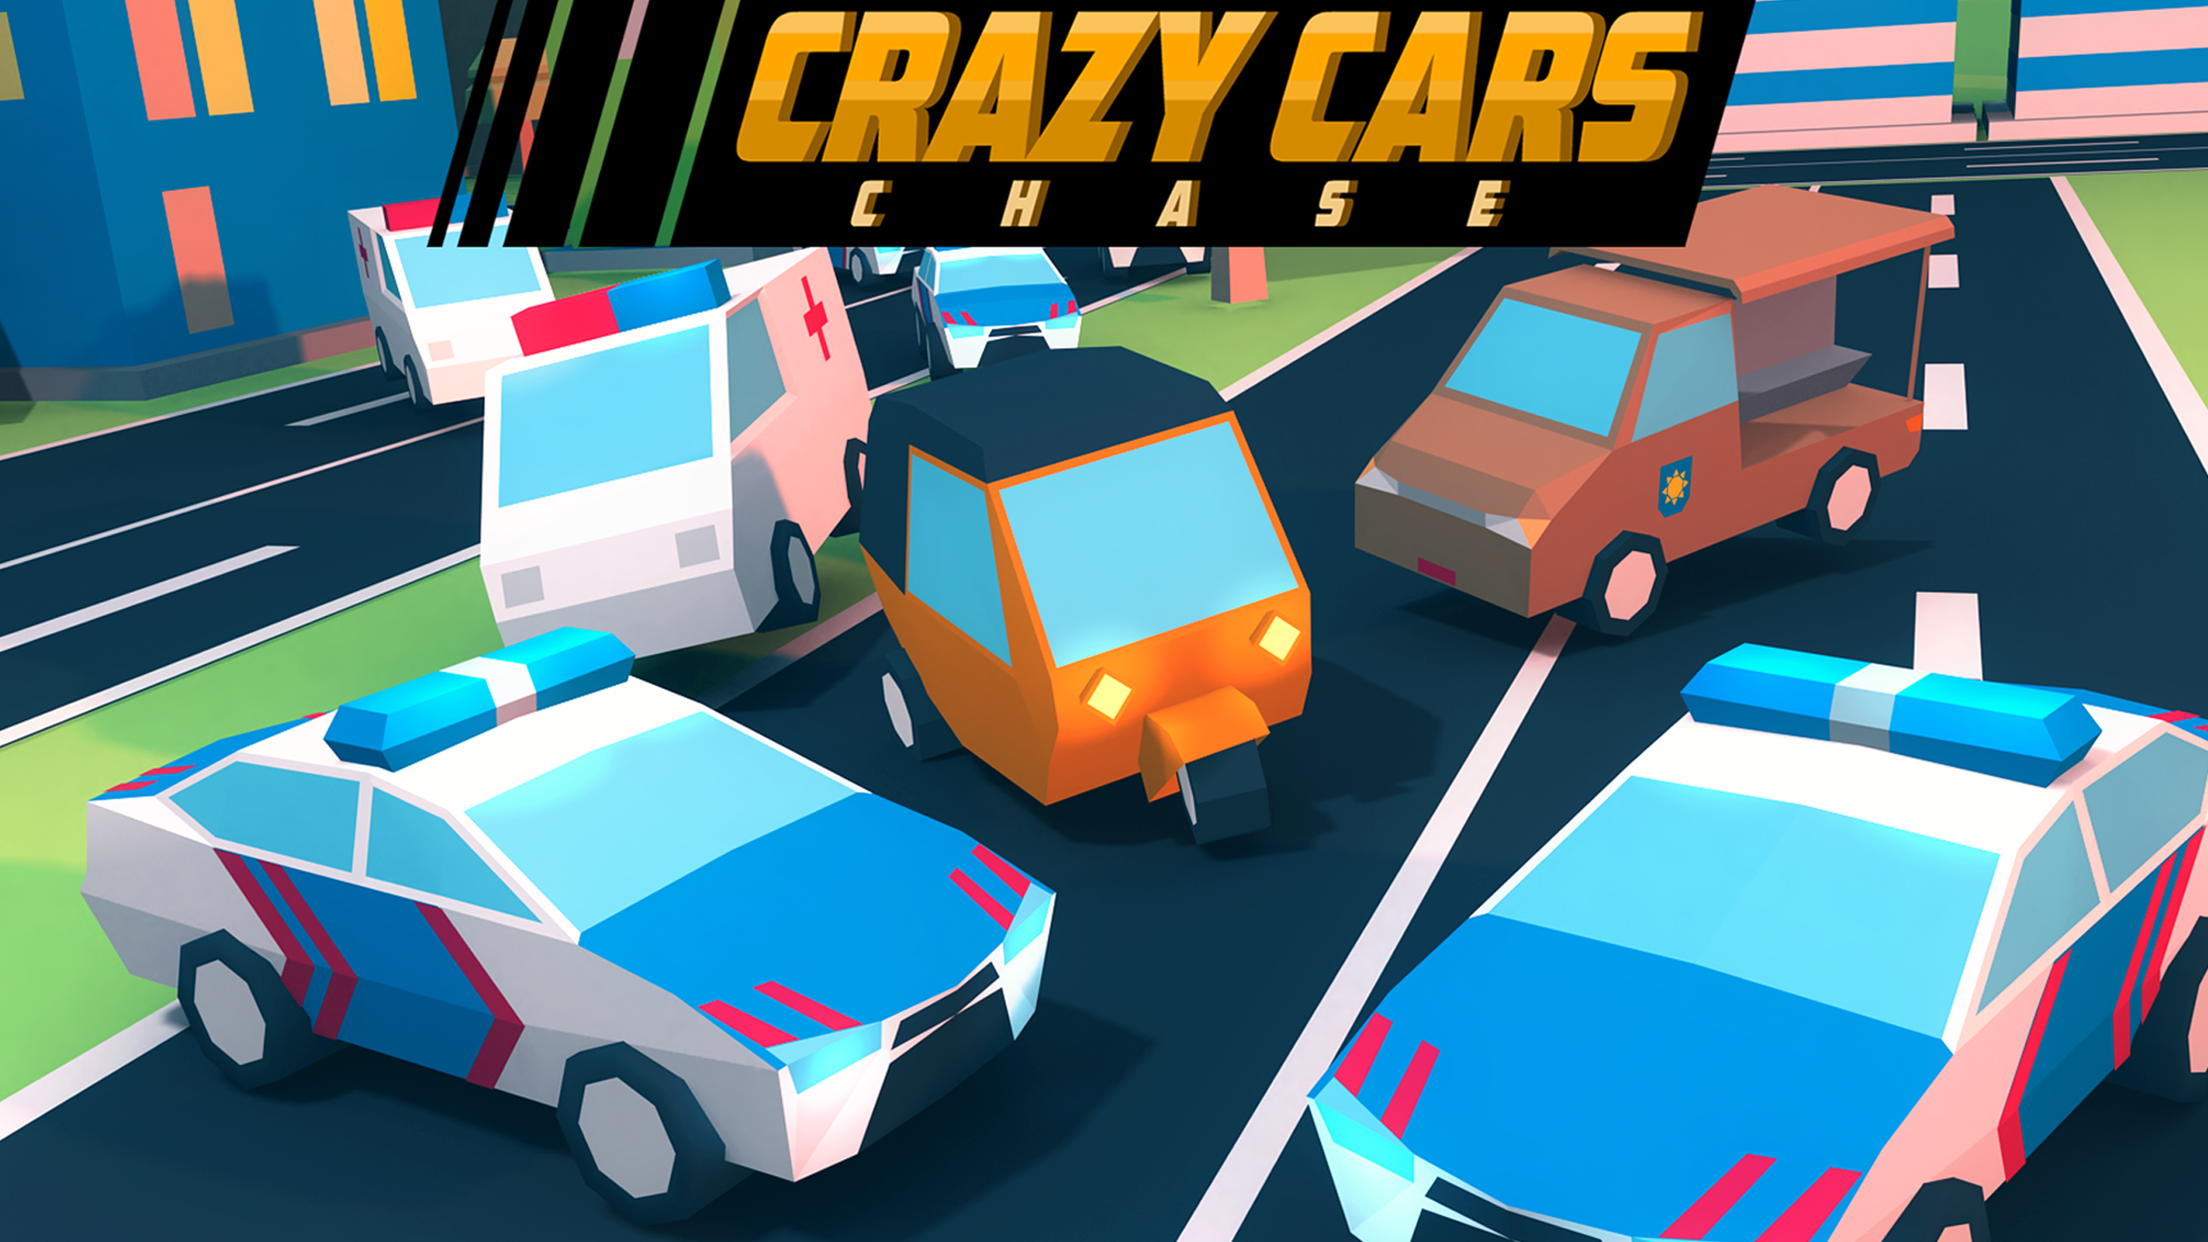 Screenshot 1 of Crazy Cars Chase 1.1.17